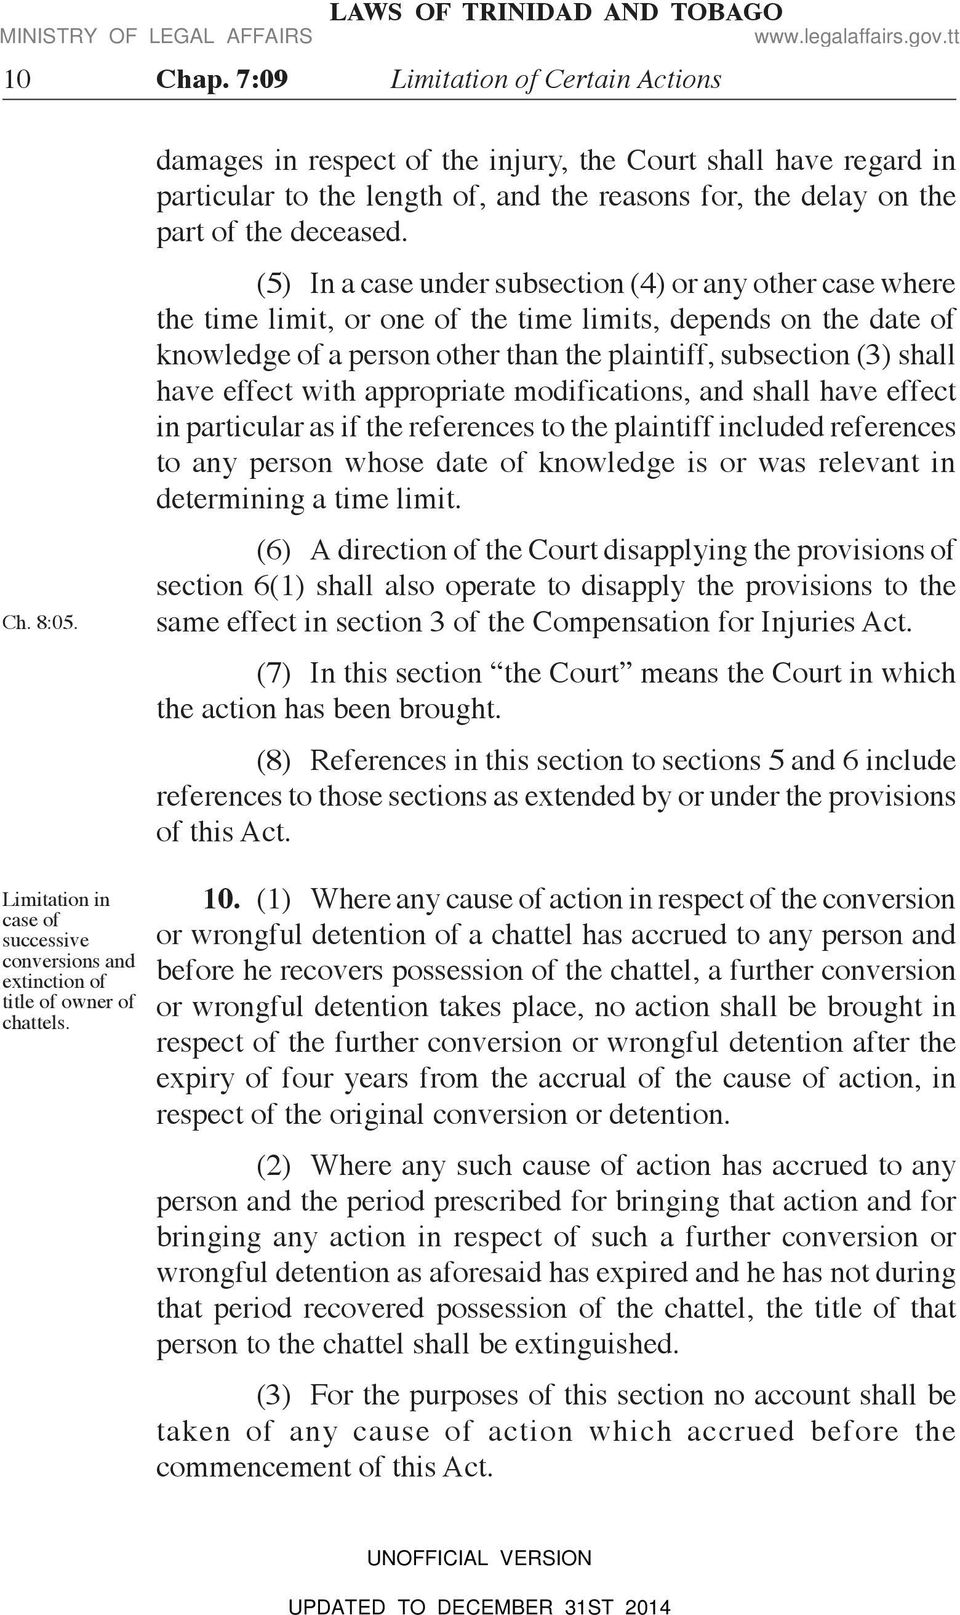 (5) In a case under subsection (4) or any other case where the time limit, or one of the time limits, depends on the date of knowledge of a person other than the plaintiff, subsection (3) shall have